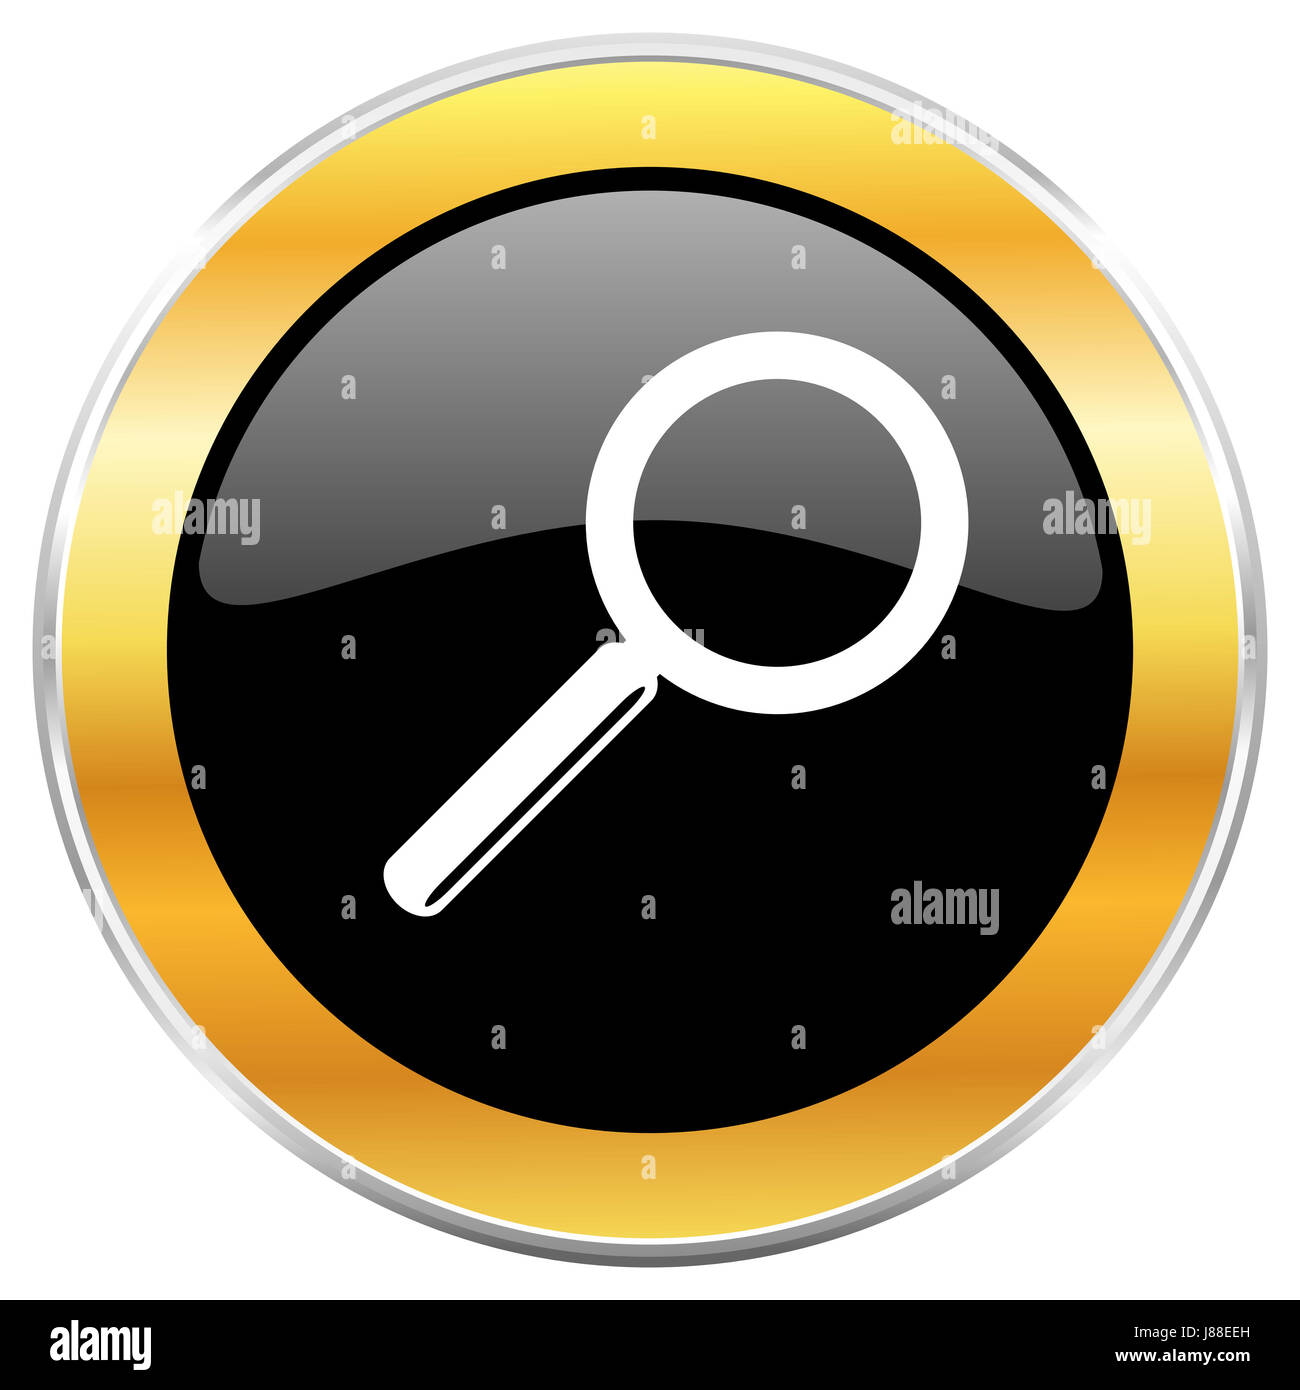 Search black web icon with golden border isolated on white background ...